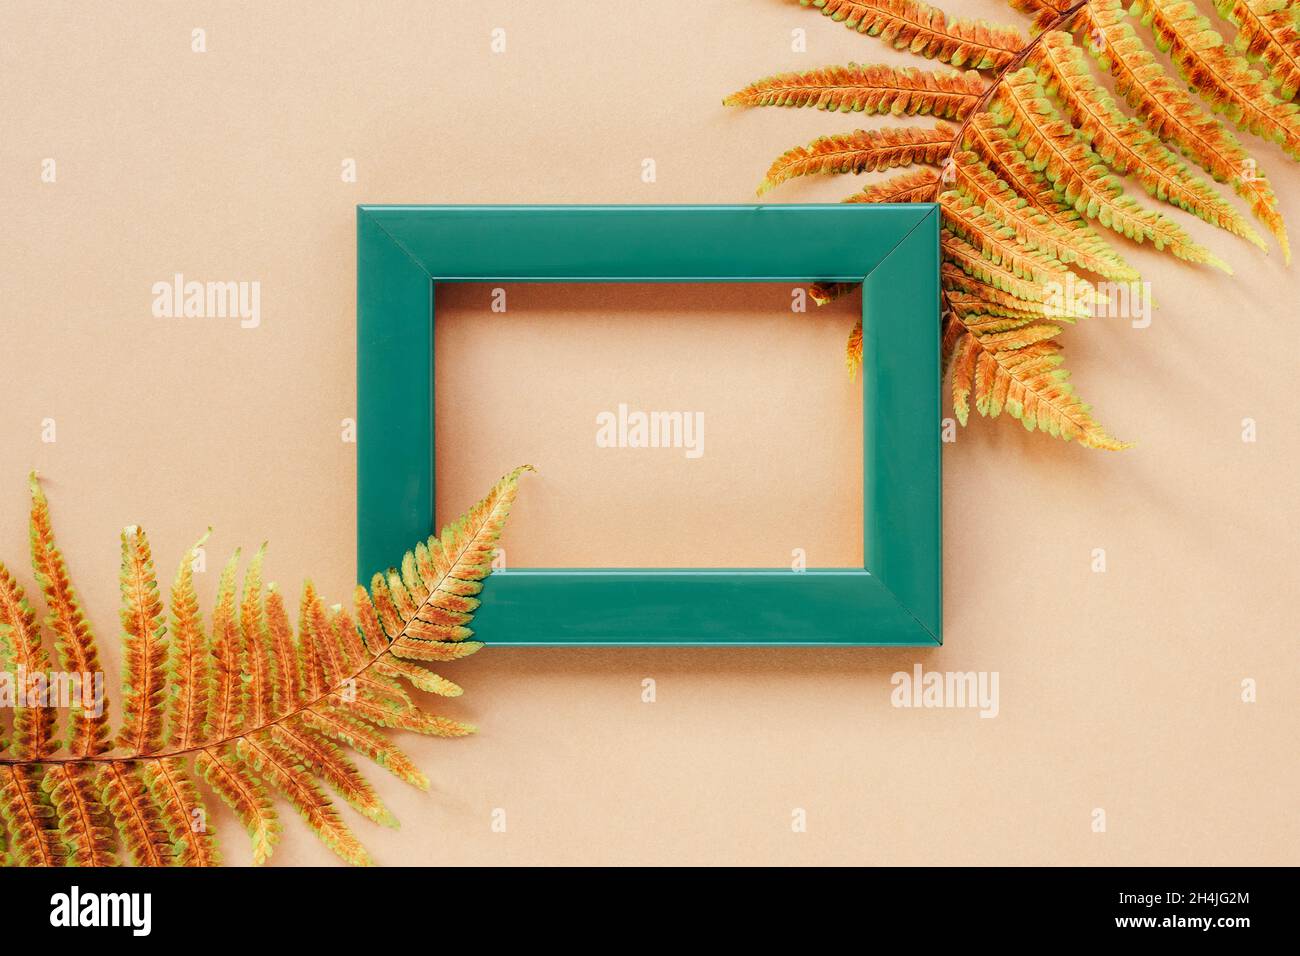 Blank green picture frame and yellow autumn fern leaves on beige background. Top view, flat lay. Mock up. Stock Photo